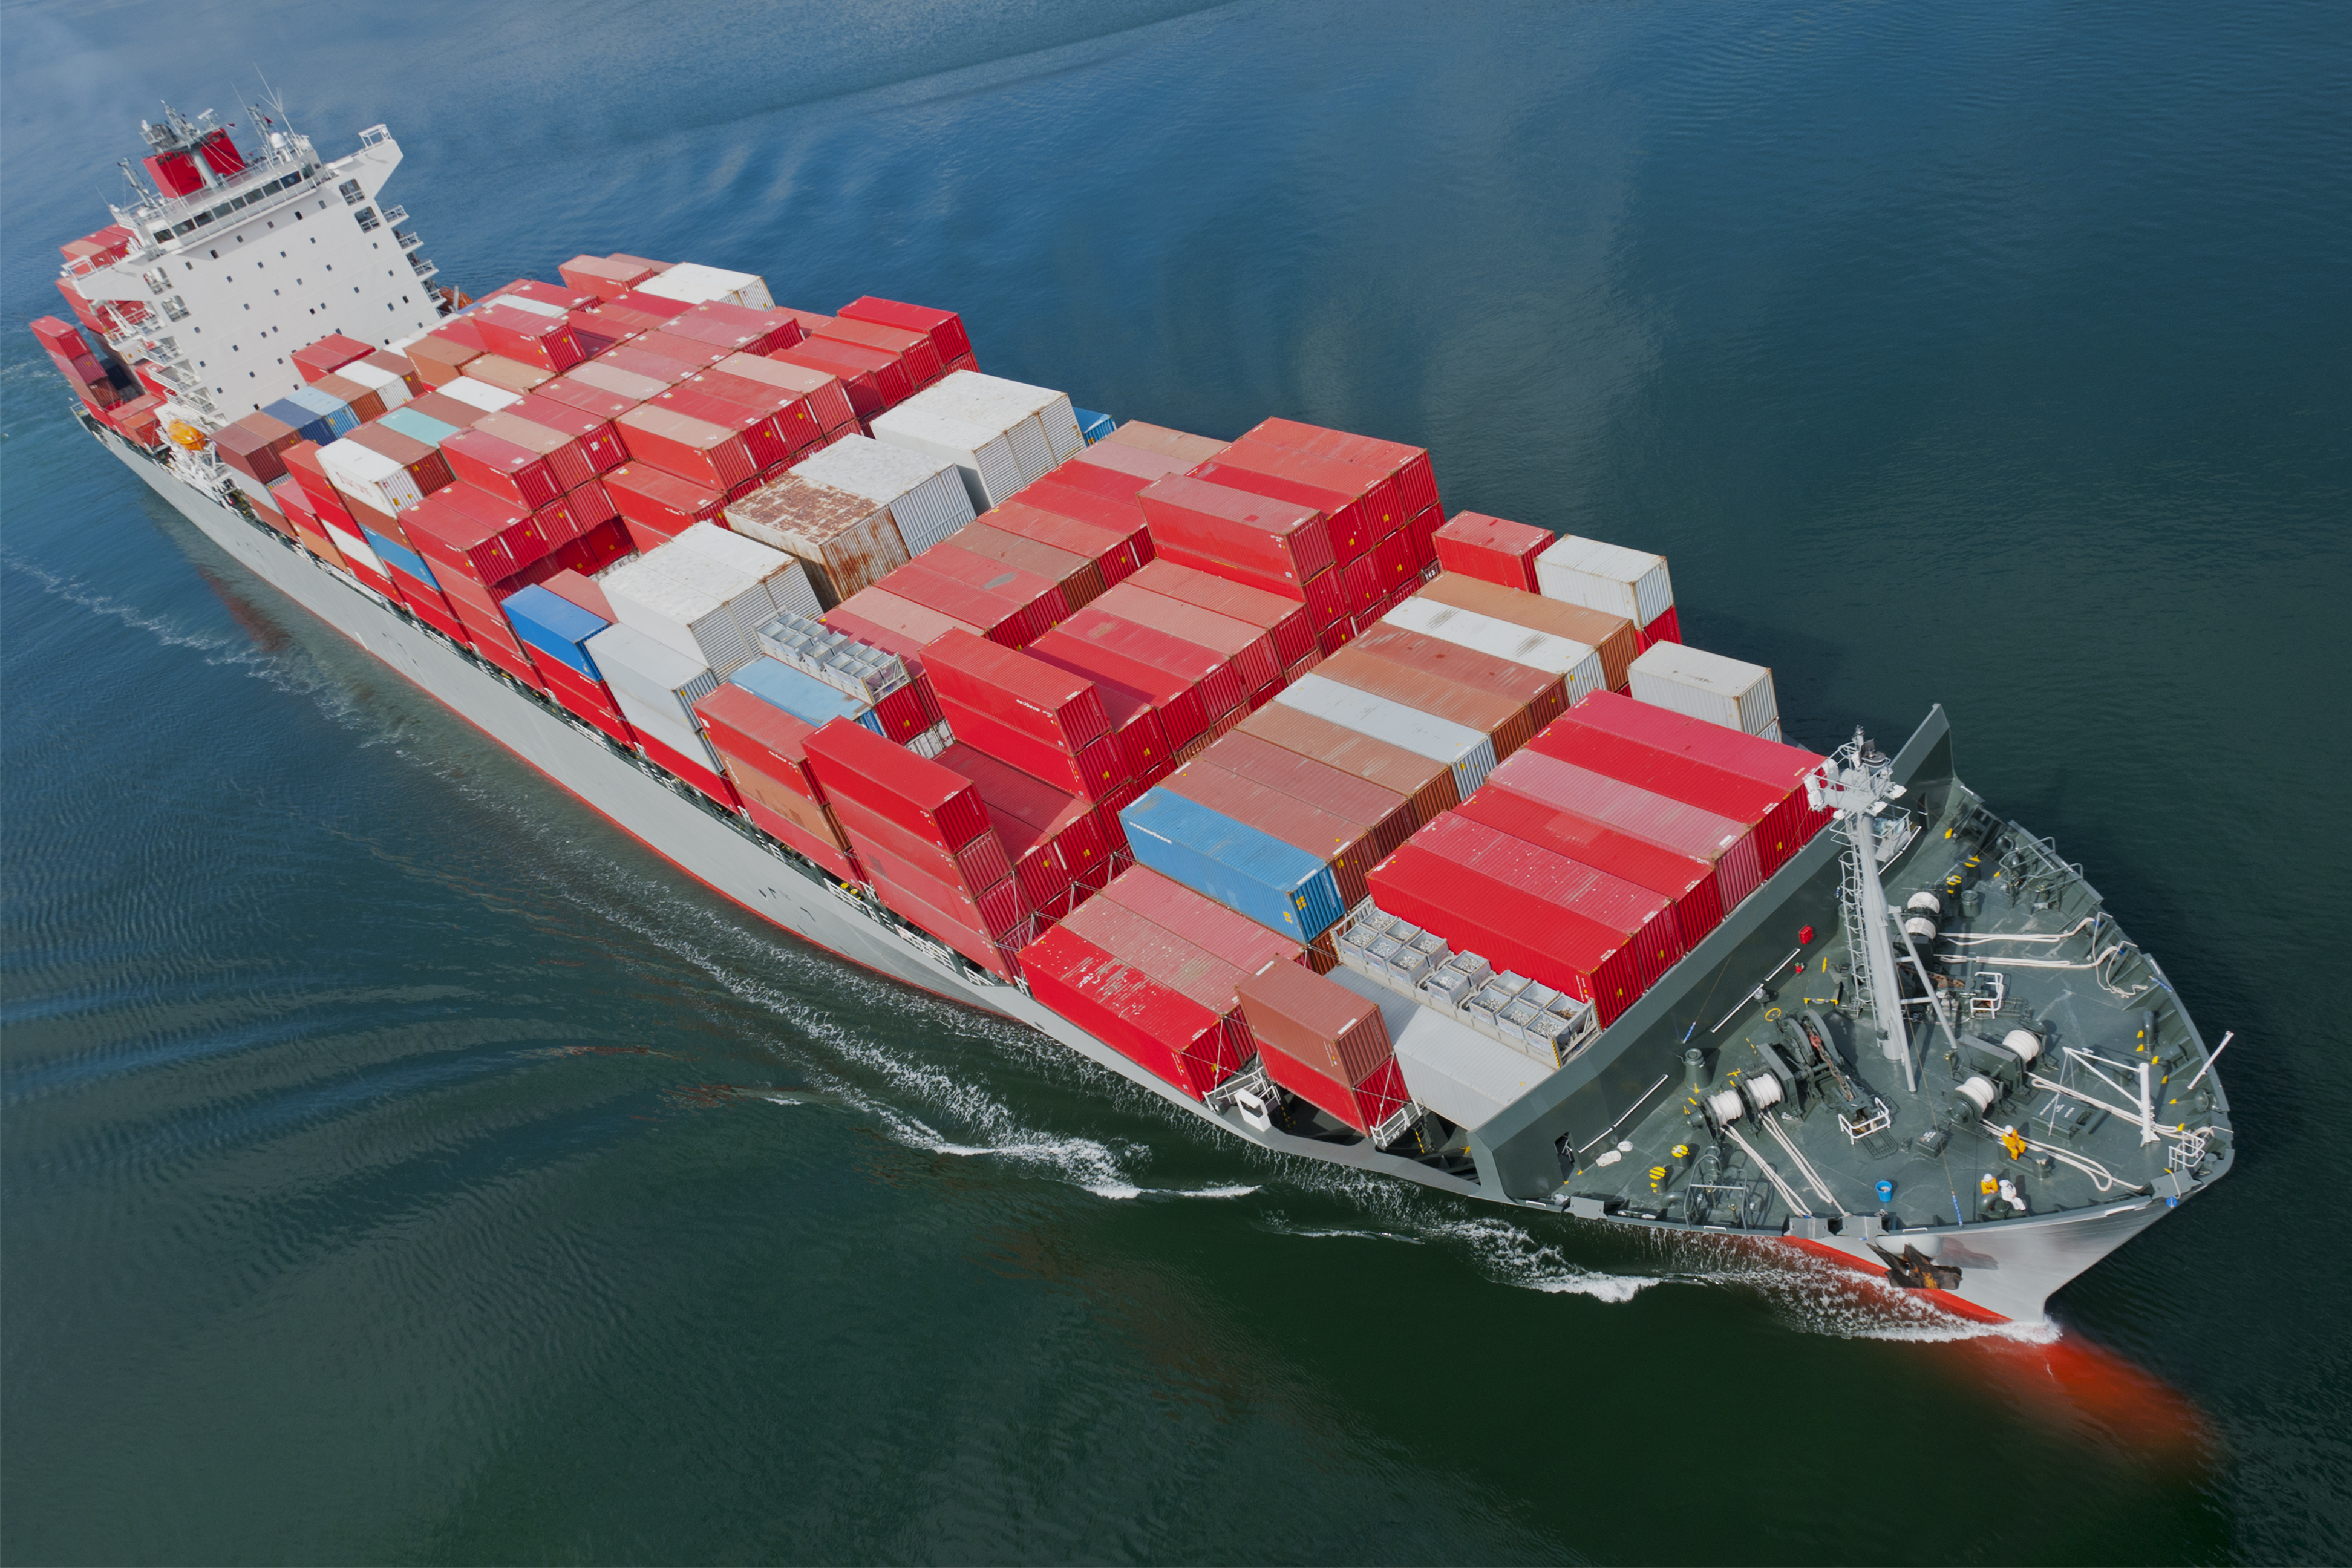 bigstock-An-aerial-view-of-a-container--31798532